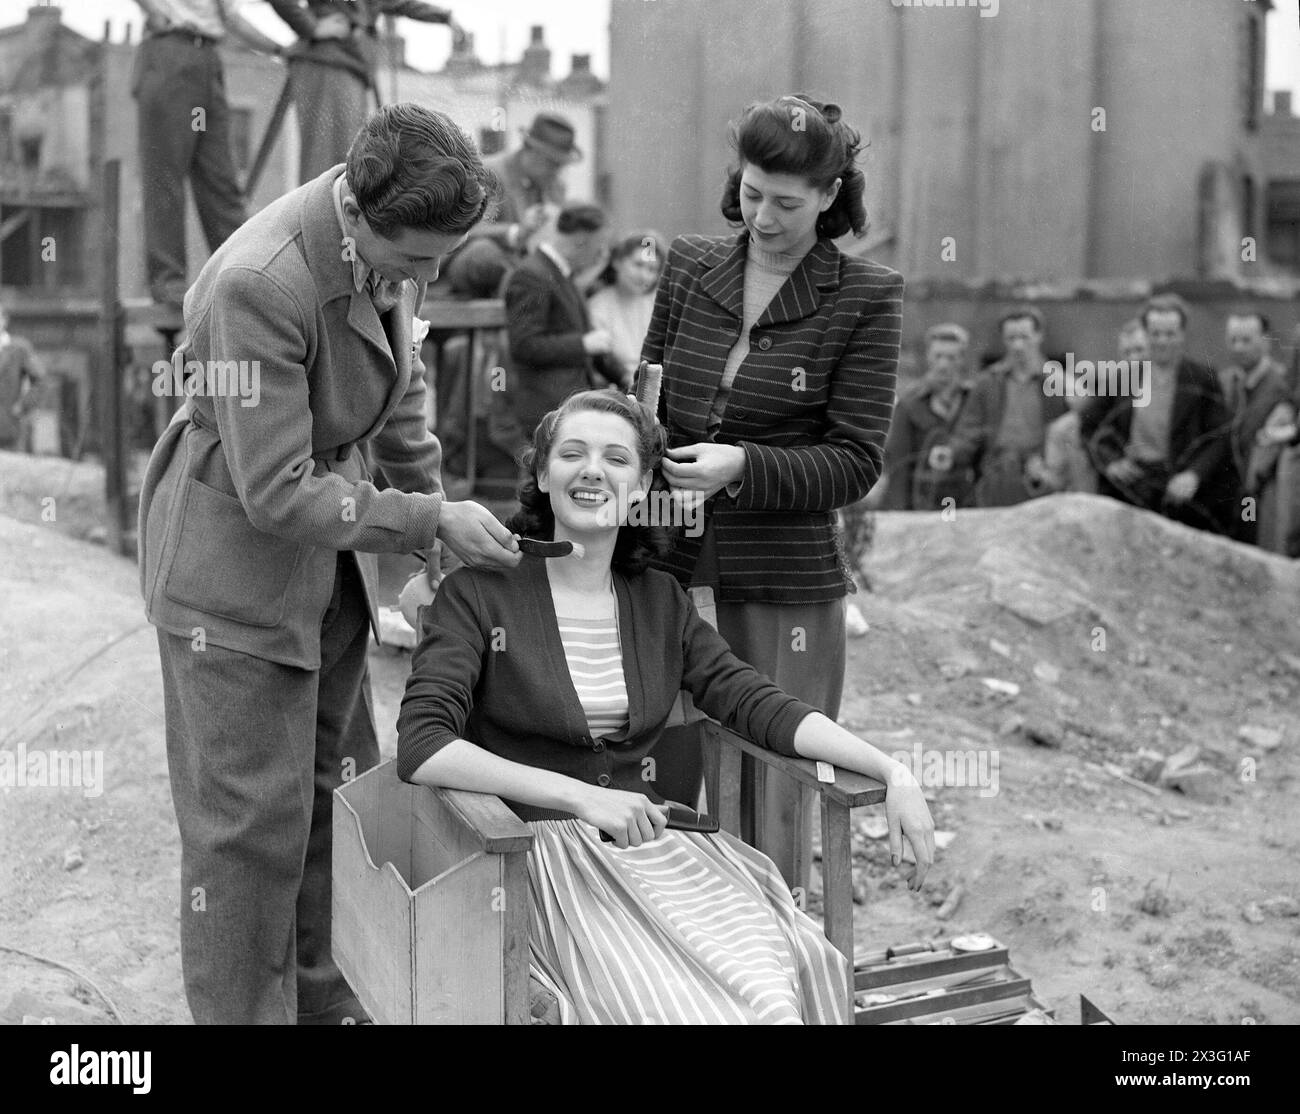 British Actress BARBARA MURRAY having her hair and make-up done before filming a scene for the EALING  comedy PASSPORT TO PIMLICO 1949 filmed on location in a large bombsite in Lambeth Director HENRY CORNELIUS Screenplay T.E.B. CLARKE Music GEORGES AURIC Ealing Studios Stock Photo